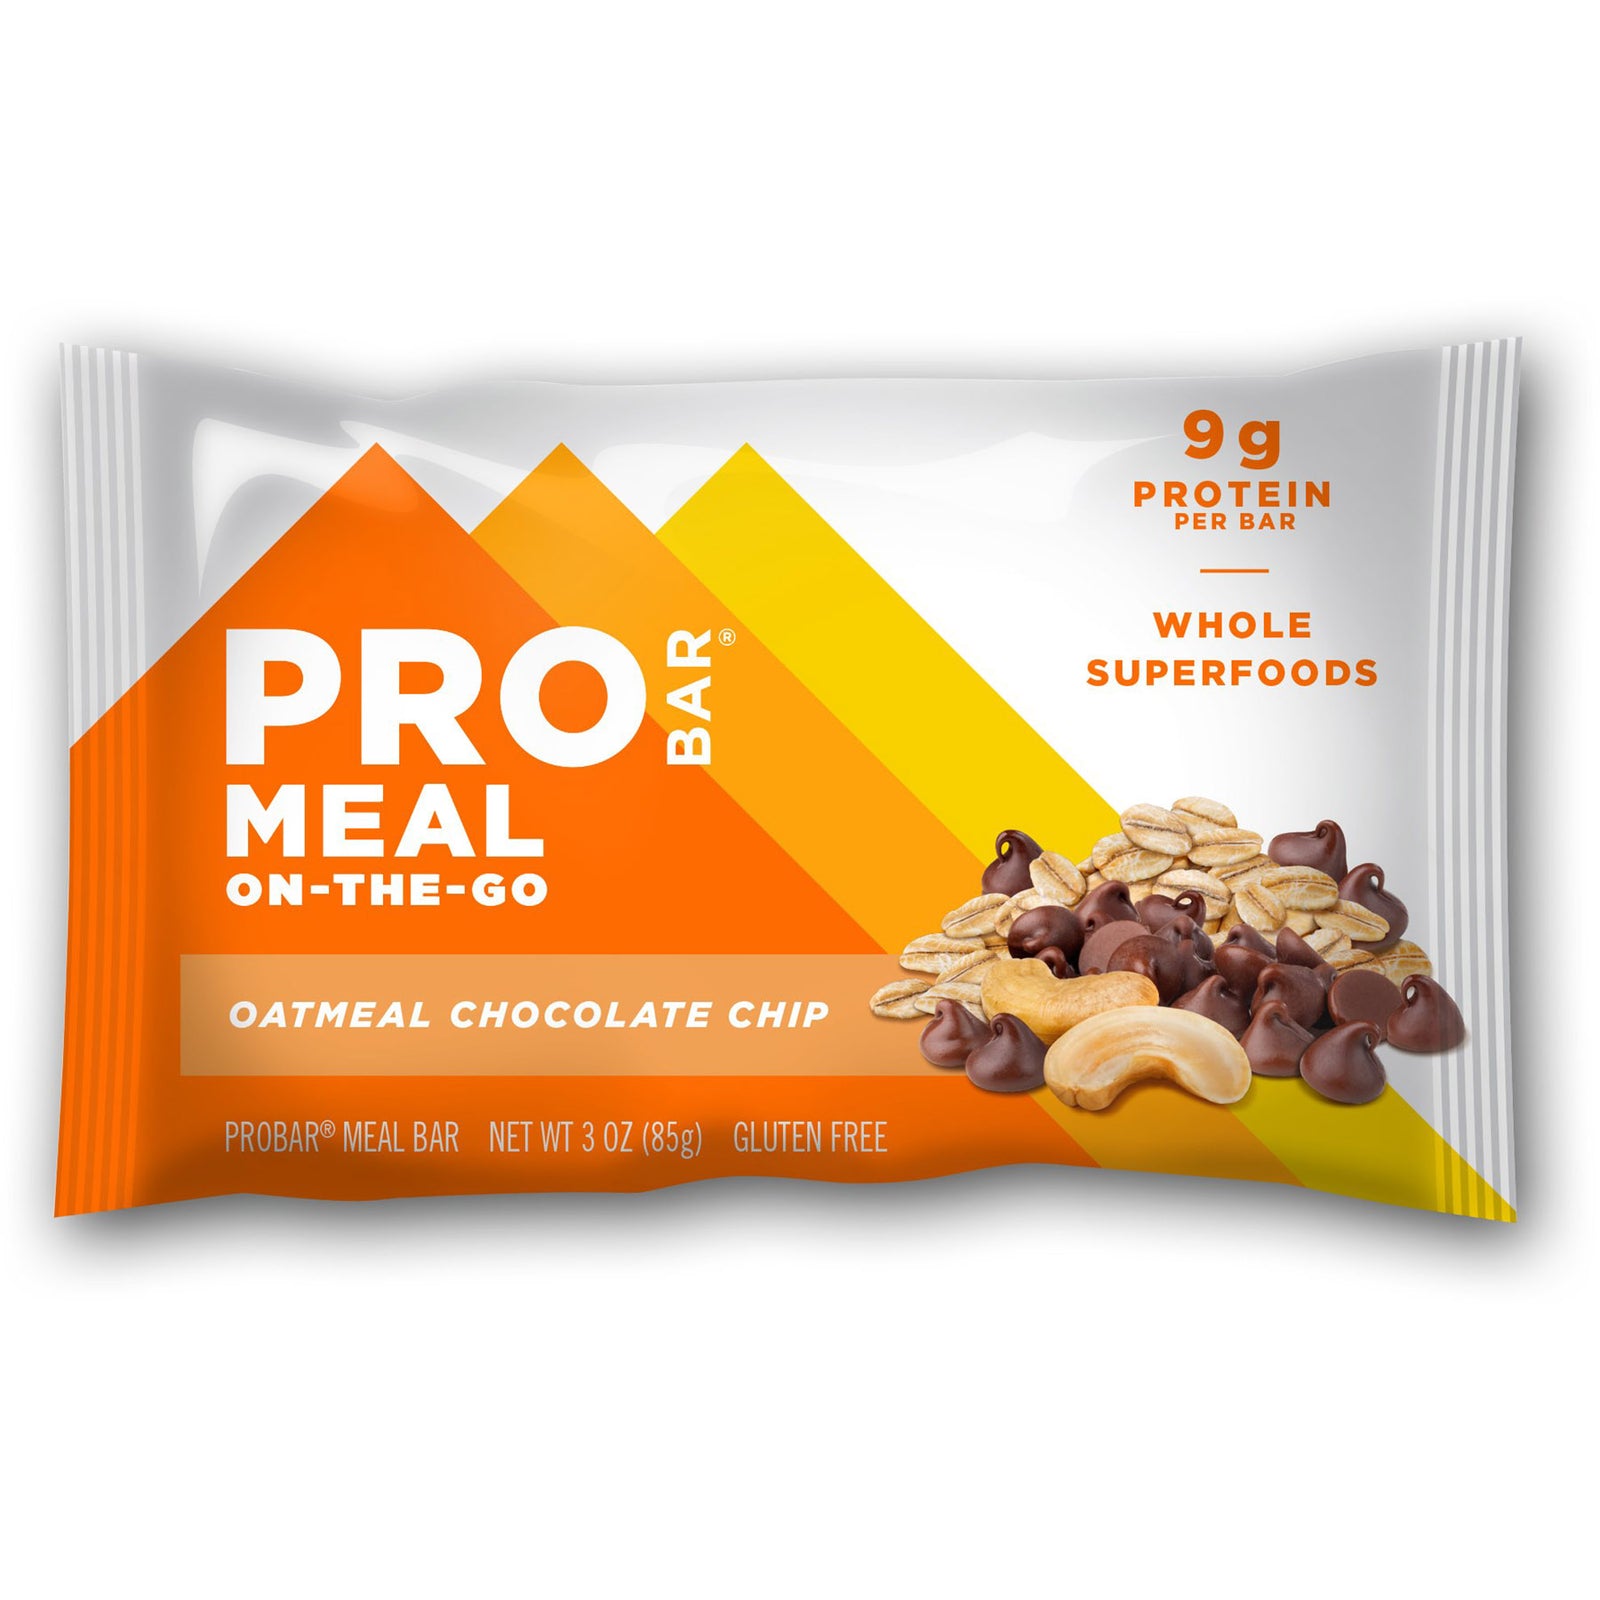 the front of the oatmeal chocolate chip pro bar package